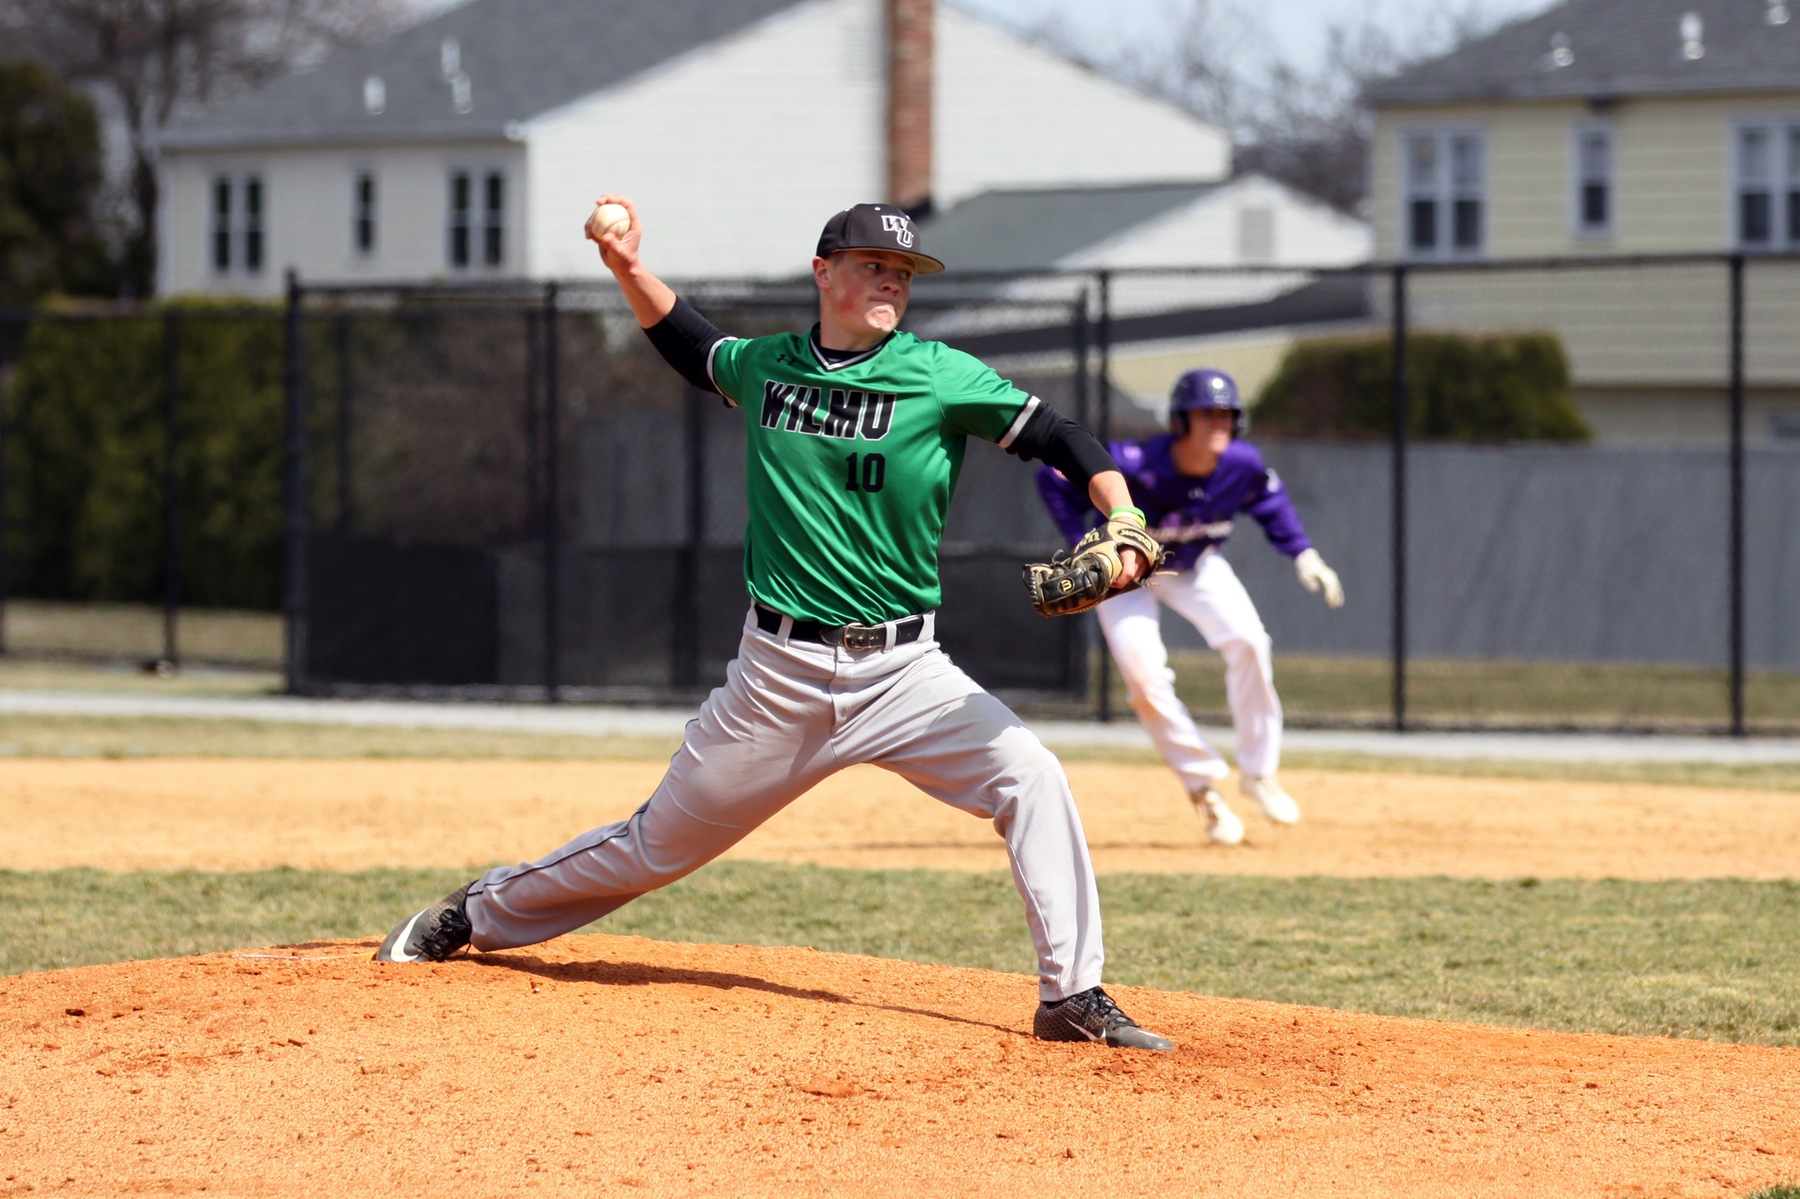 Copyright 2019; Wilmington University. All rights reserved. Photo of Dan Hyatt as he improved to 3-1 with the win. Photo by Dan Lauletta. March 17, 2019 vs. Bridgeport.